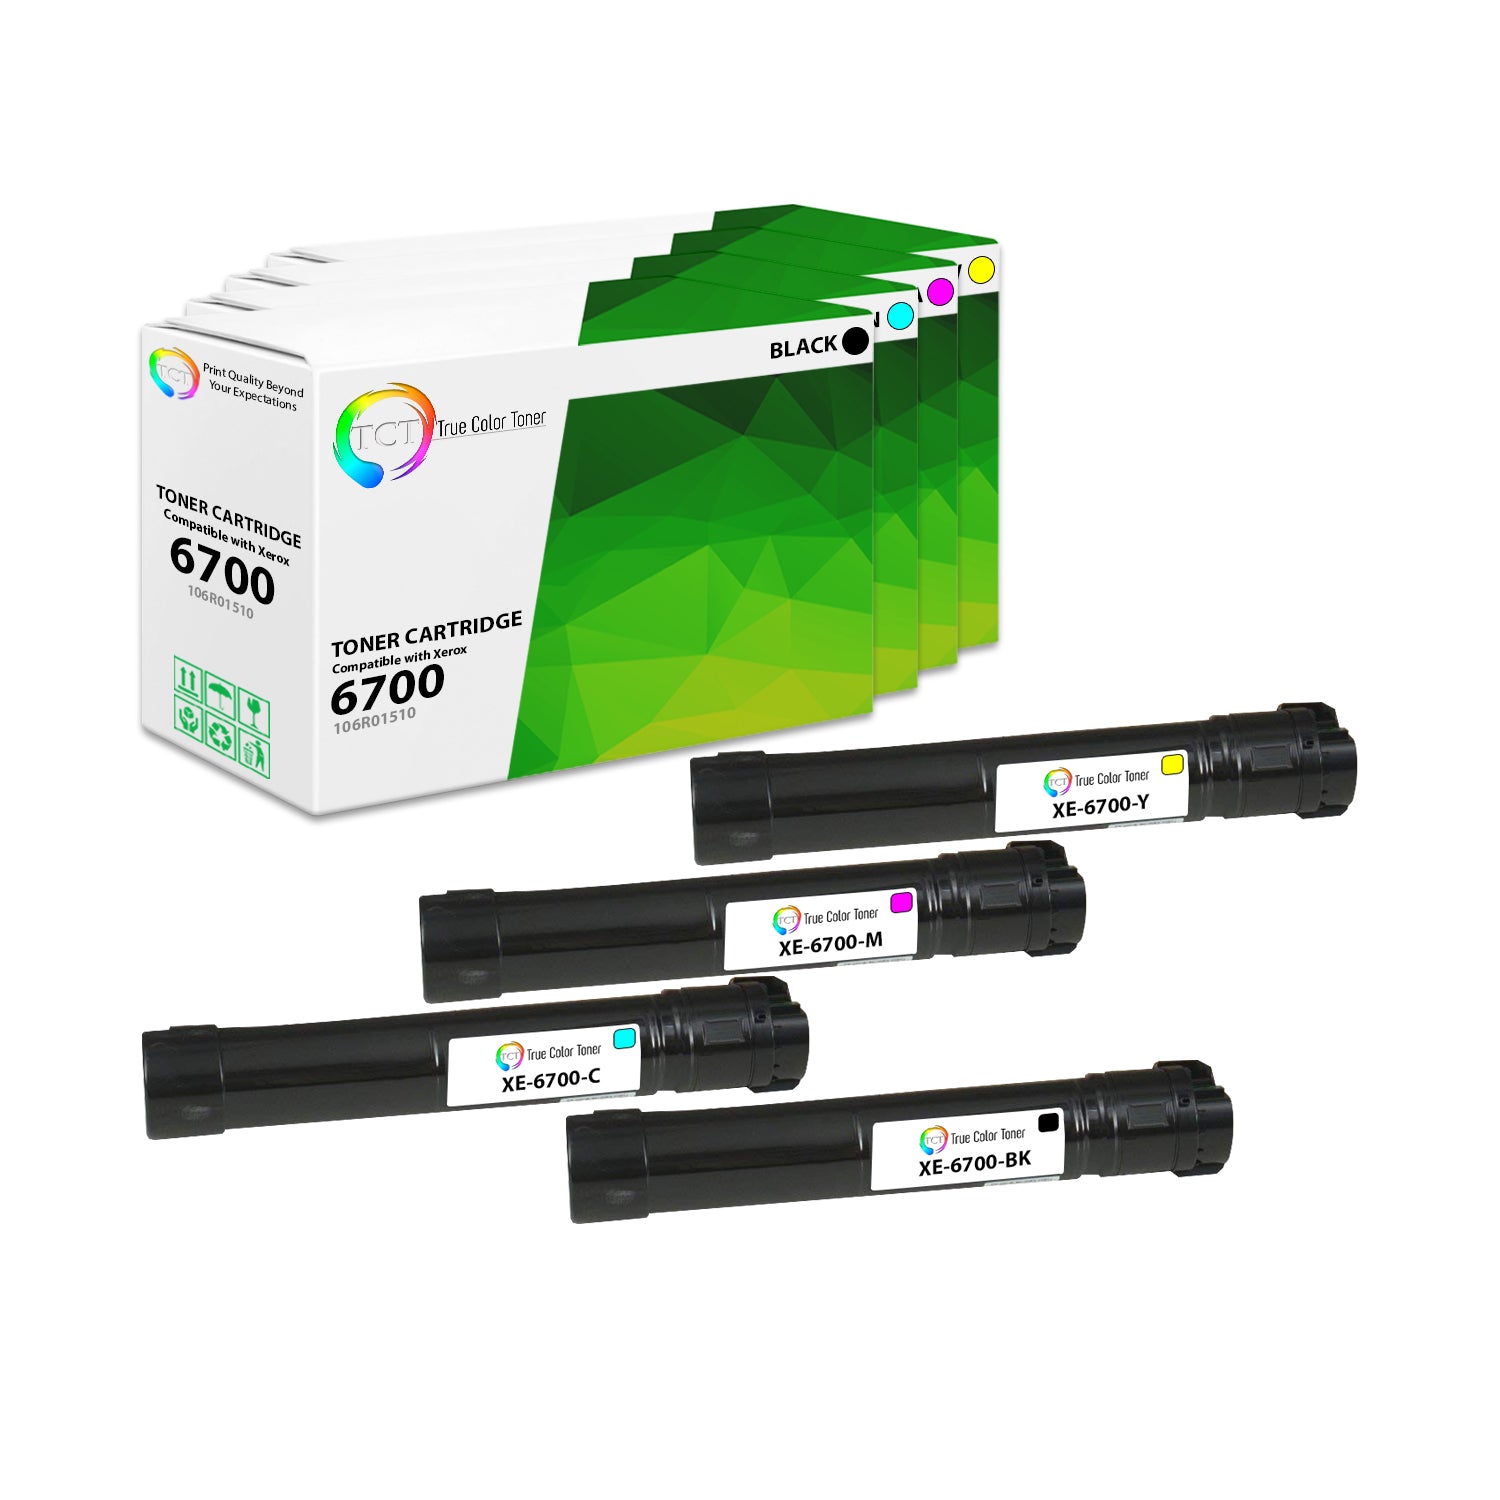 TCT Compatible Toner Cartridge Replacement for the Xerox 6700 Series - 4 Pack (BK, C, M, Y)